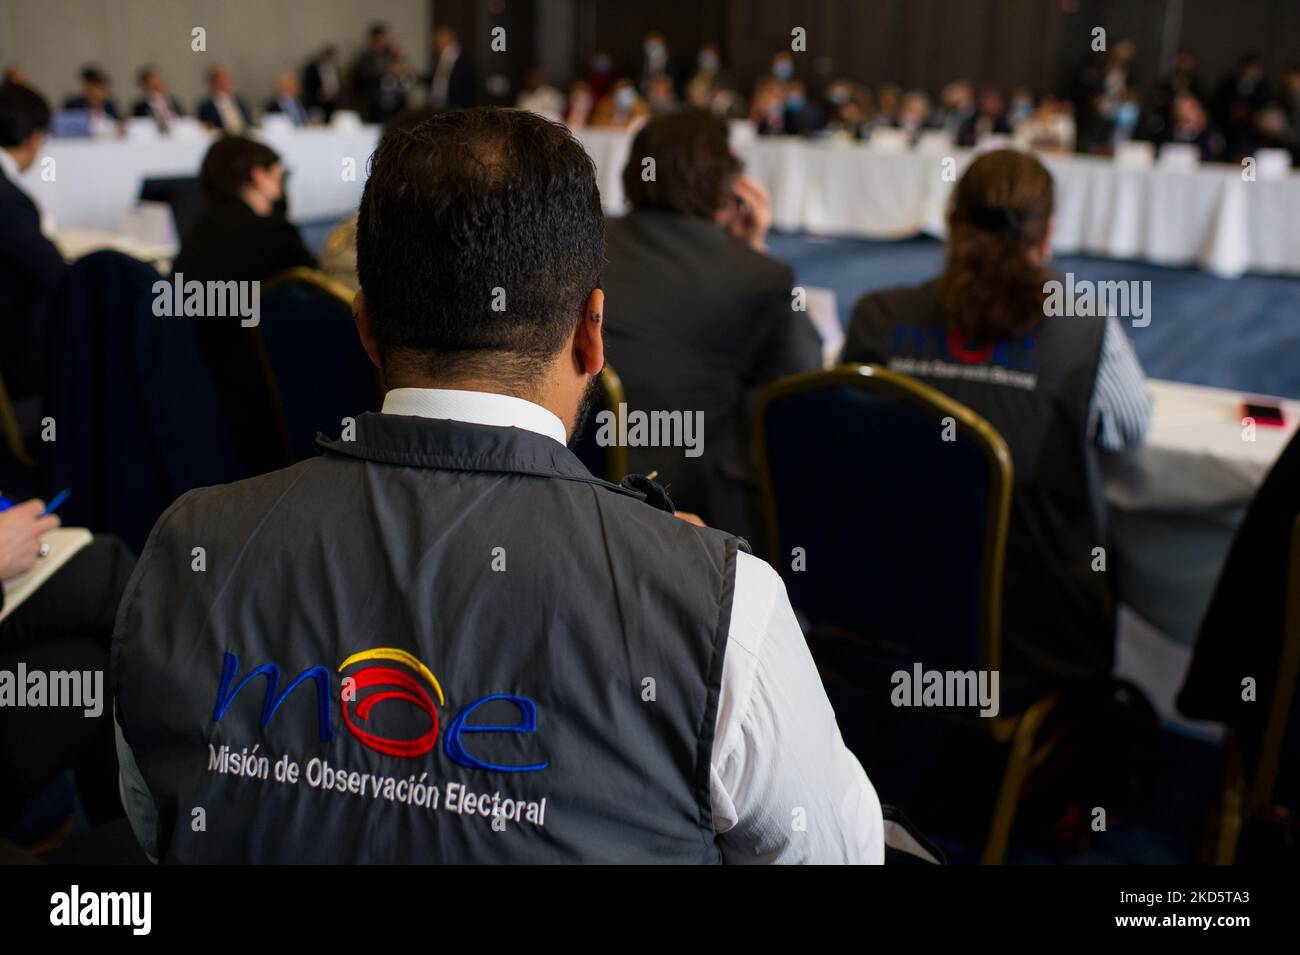 Members of the electorial observation mision 'MOE' during a meeting of electoral guarantees were national registrar Alexander Vega opted not to do a new election count for the 2022 congressional elections, in Bogota, Colombia March 22, 2022. (Photo by Sebastian Barros/NurPhoto) Stock Photo